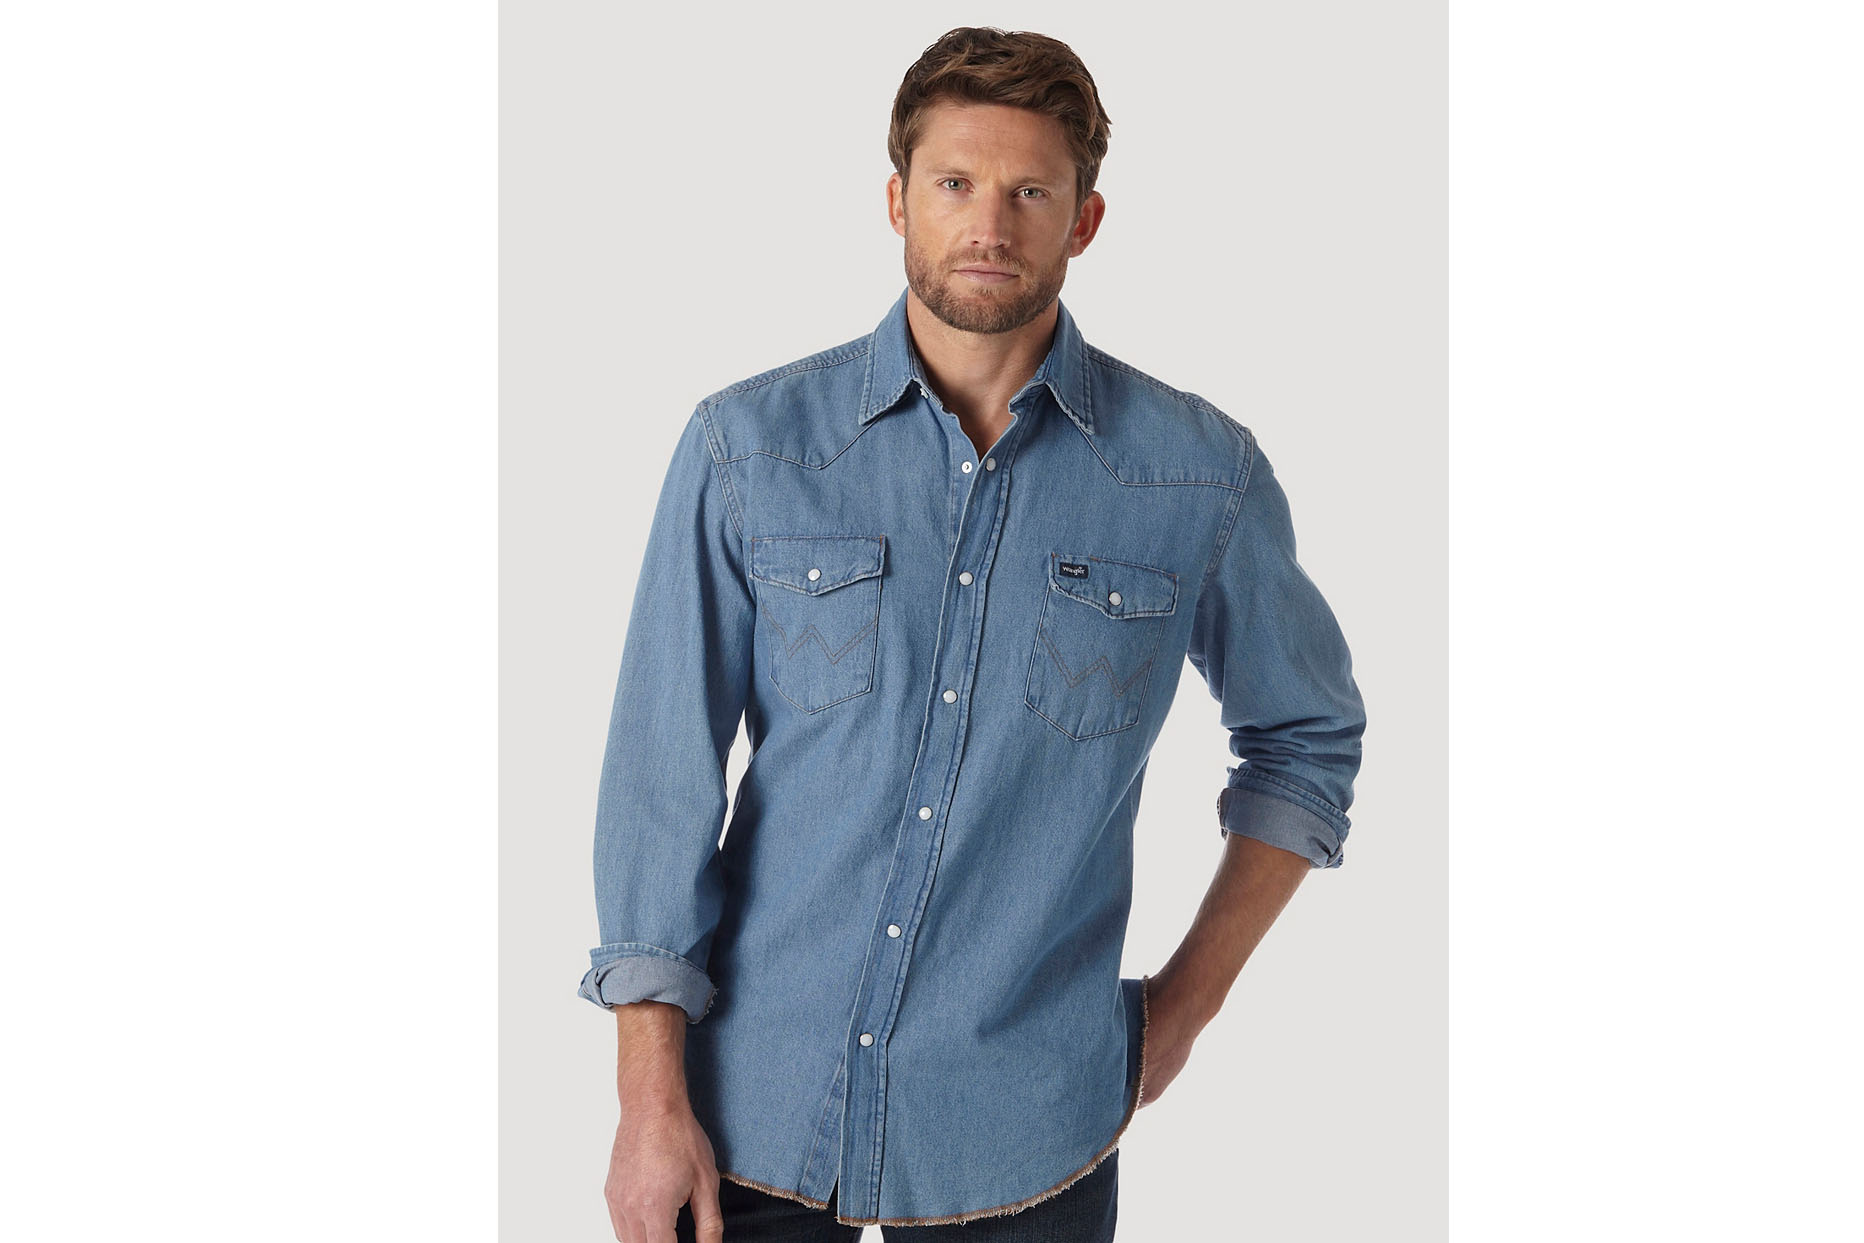 The 7 Best Denim Shirts for Men in 2022 ...